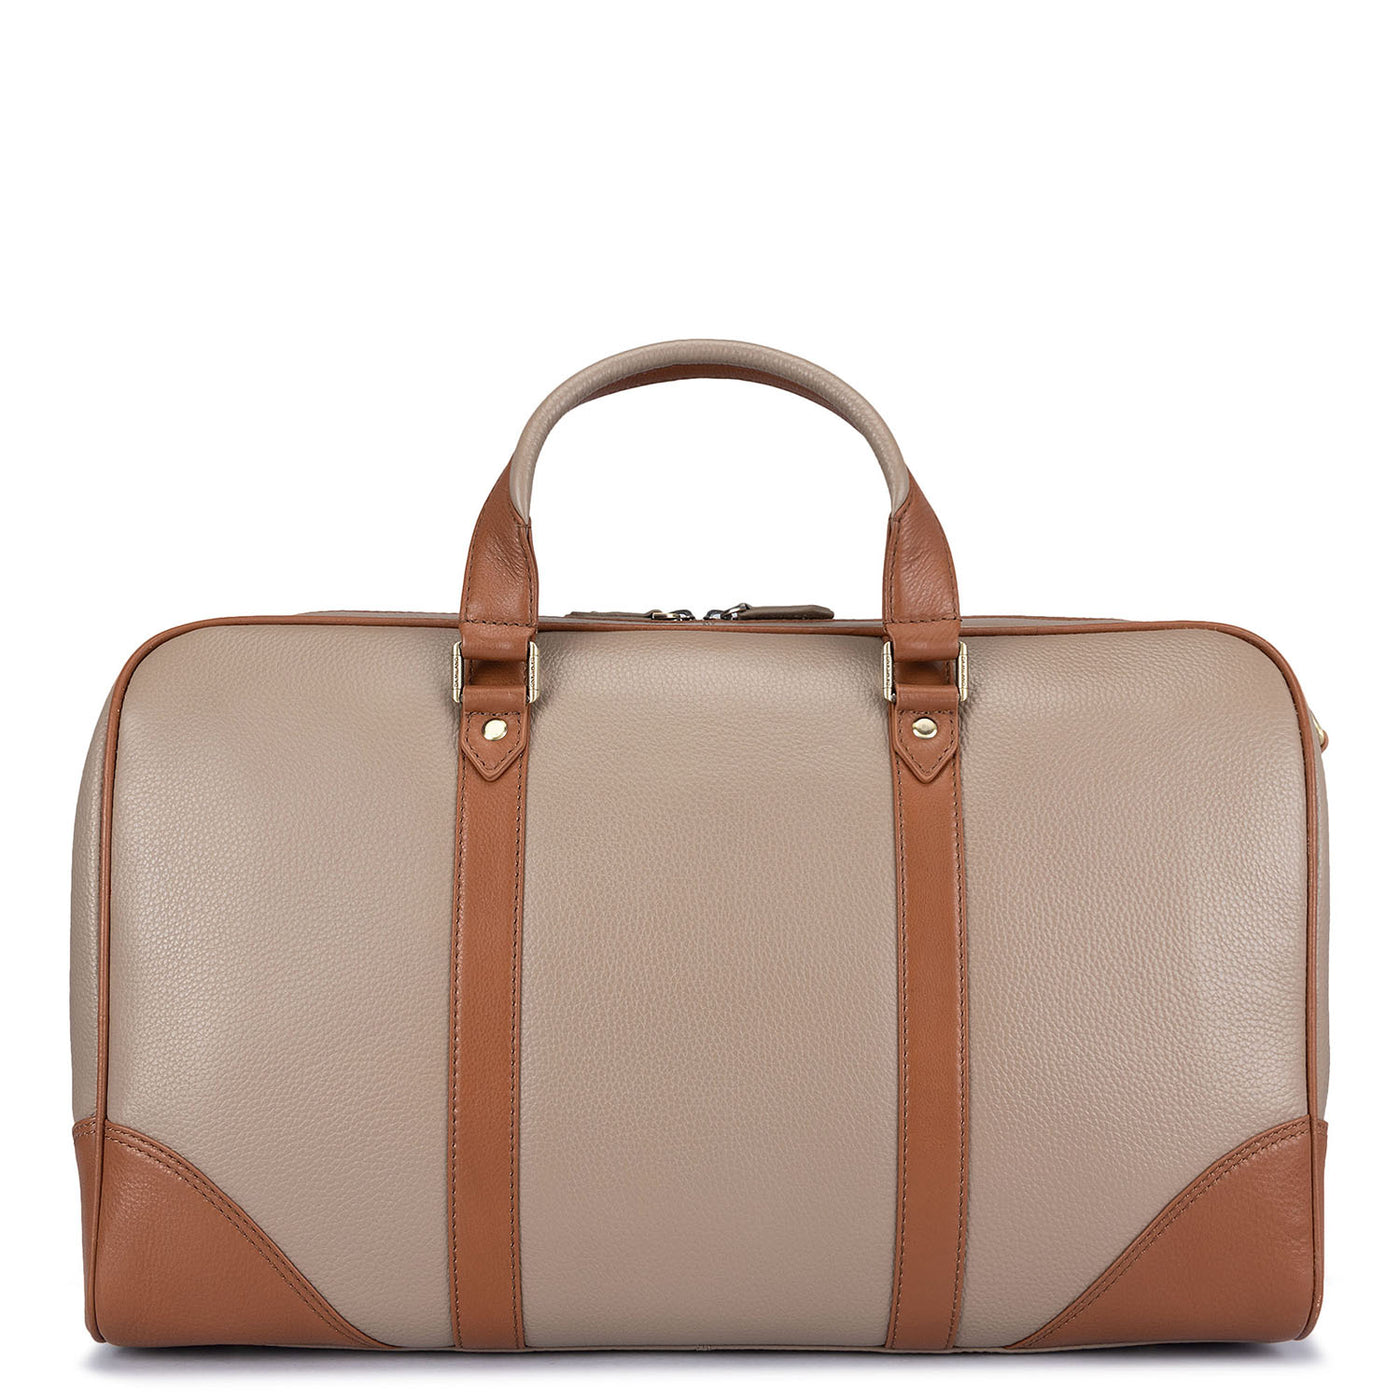 Wax Leather Luggage - Taupe